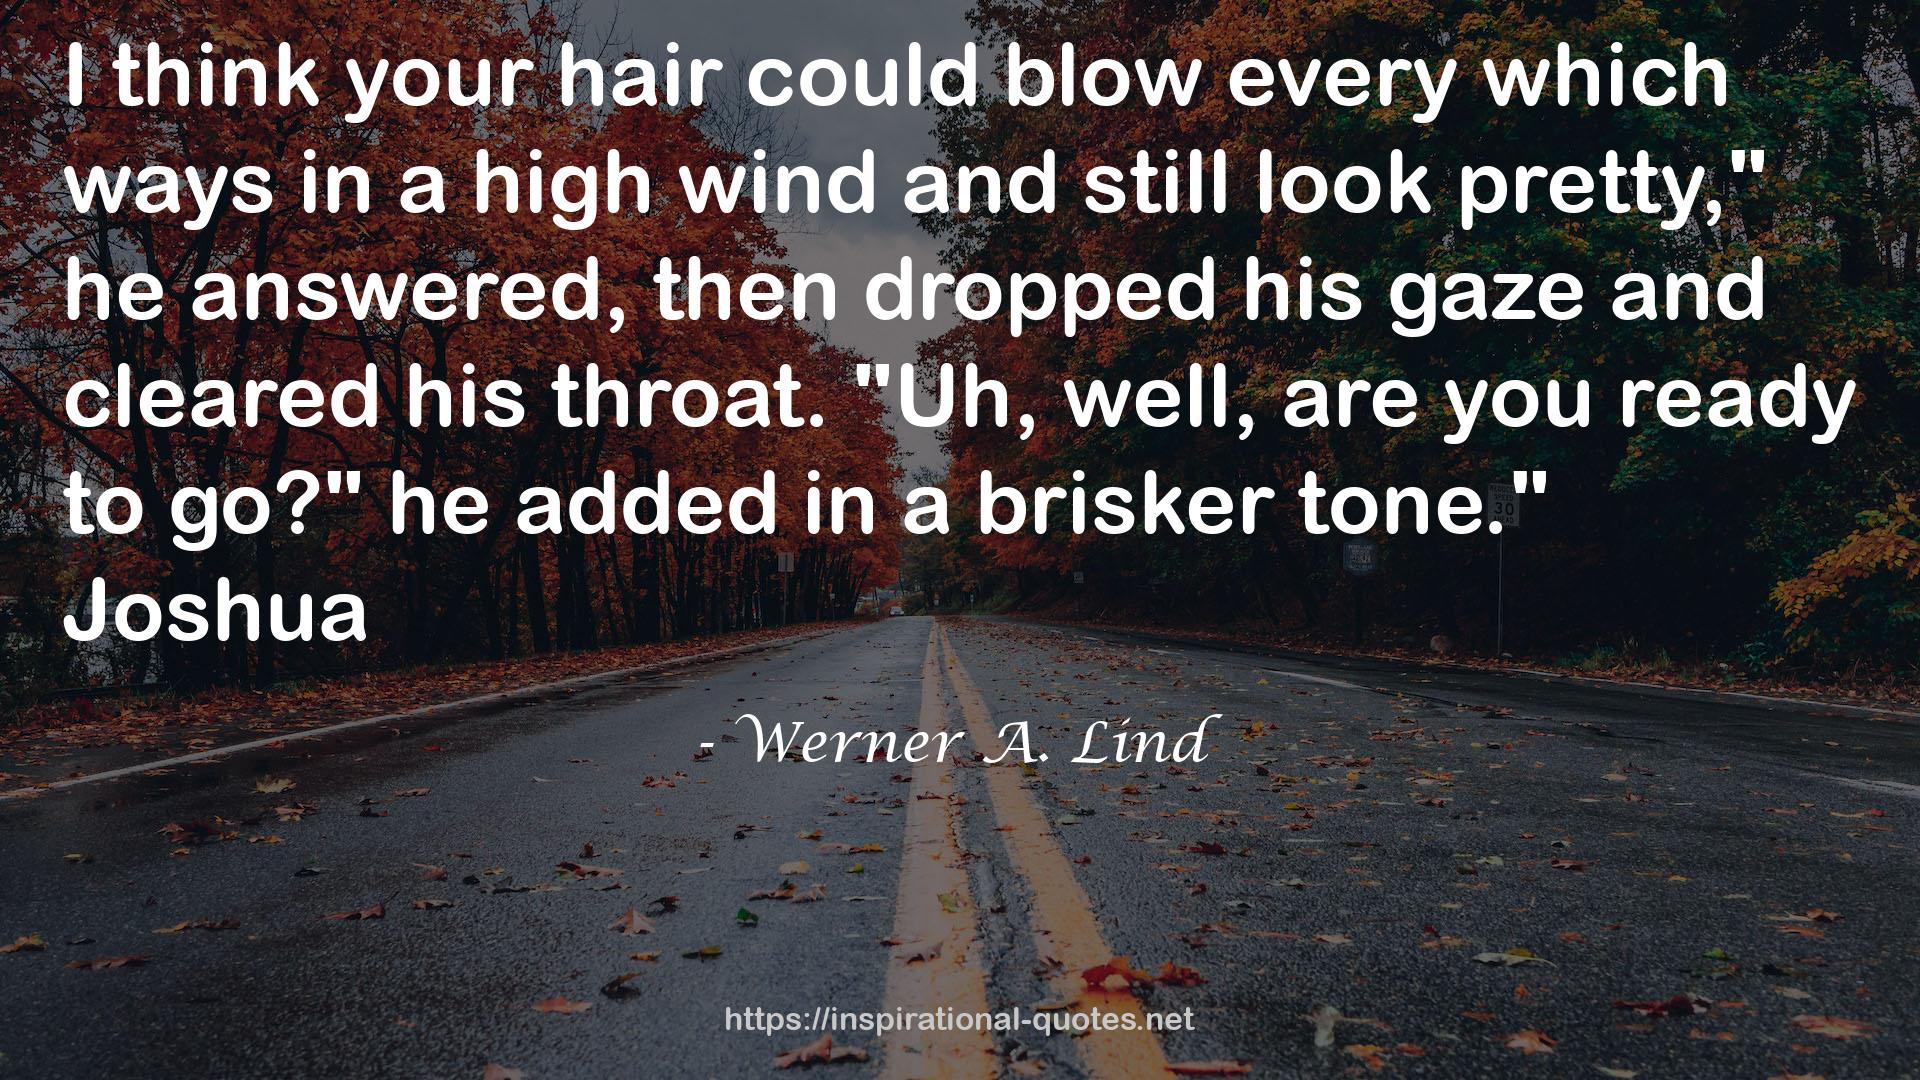 Werner A. Lind QUOTES